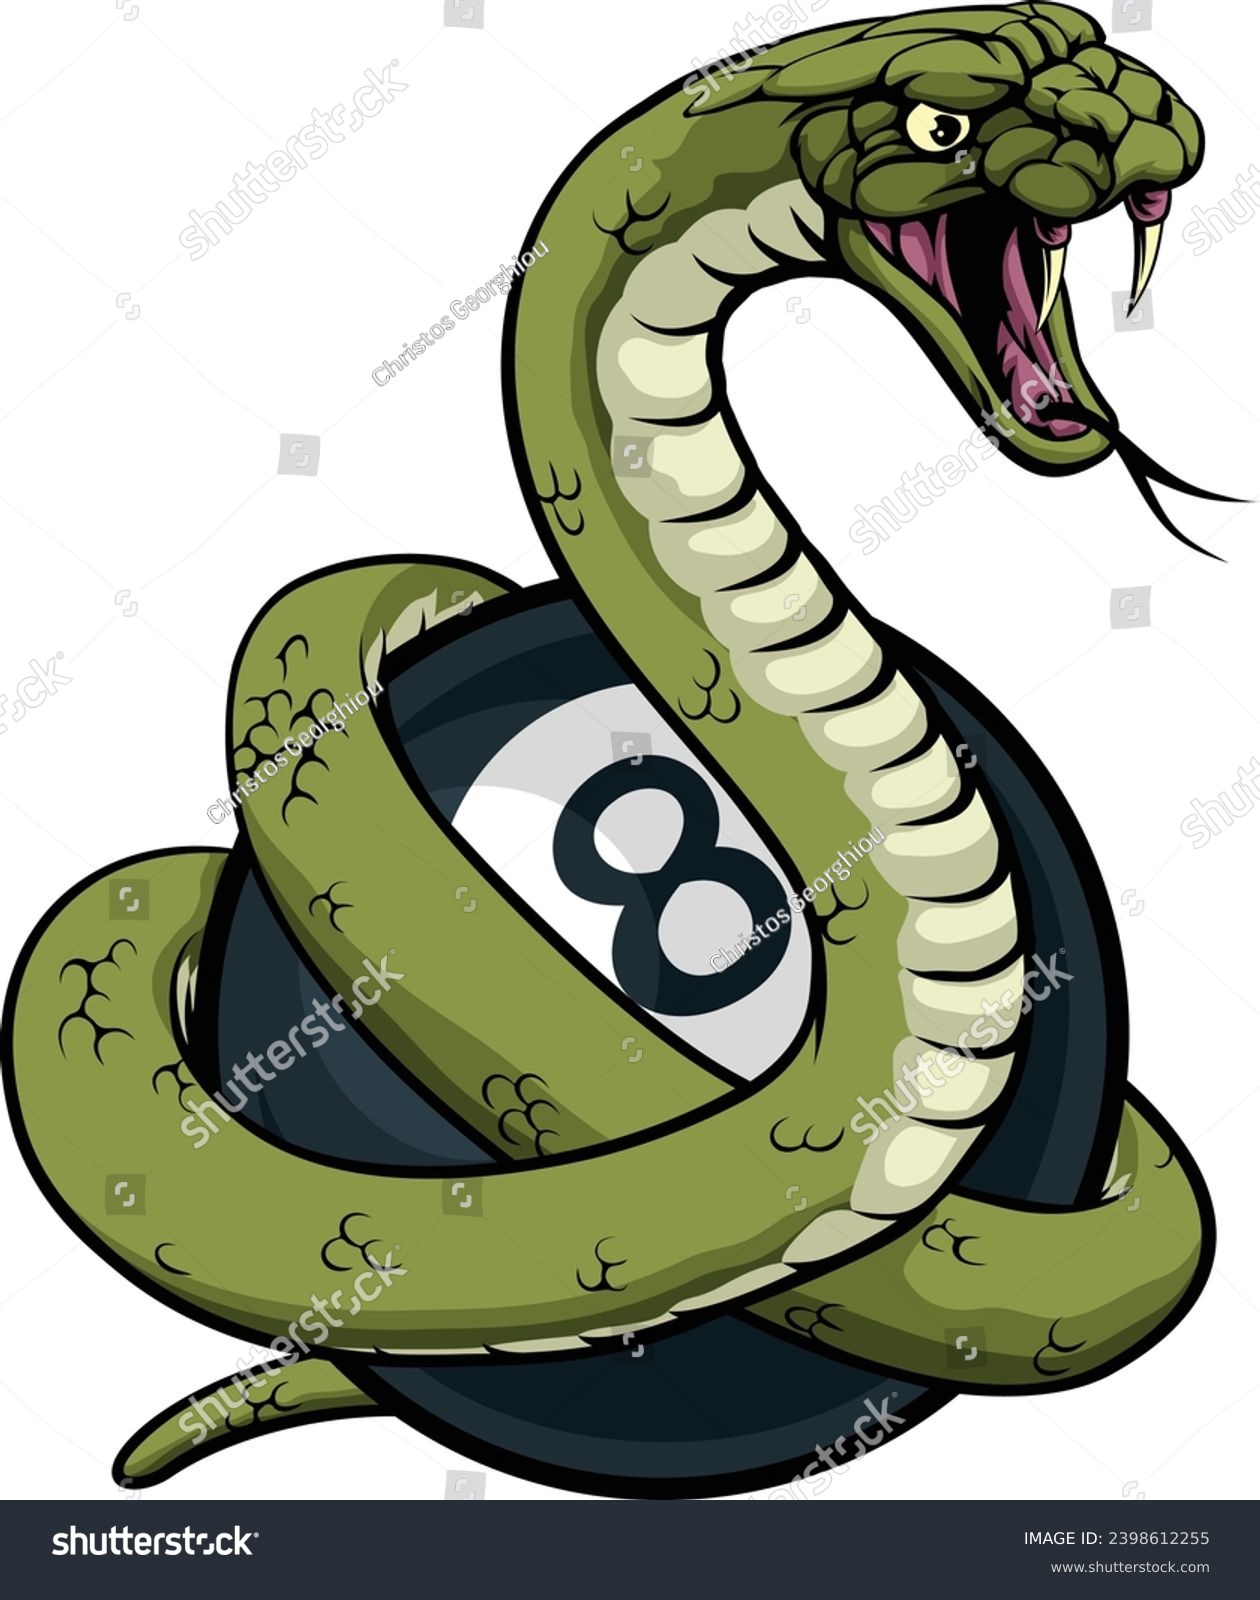 SVG of A snake angry mean pool billiards mascot cartoon character holding a black 8 ball. svg